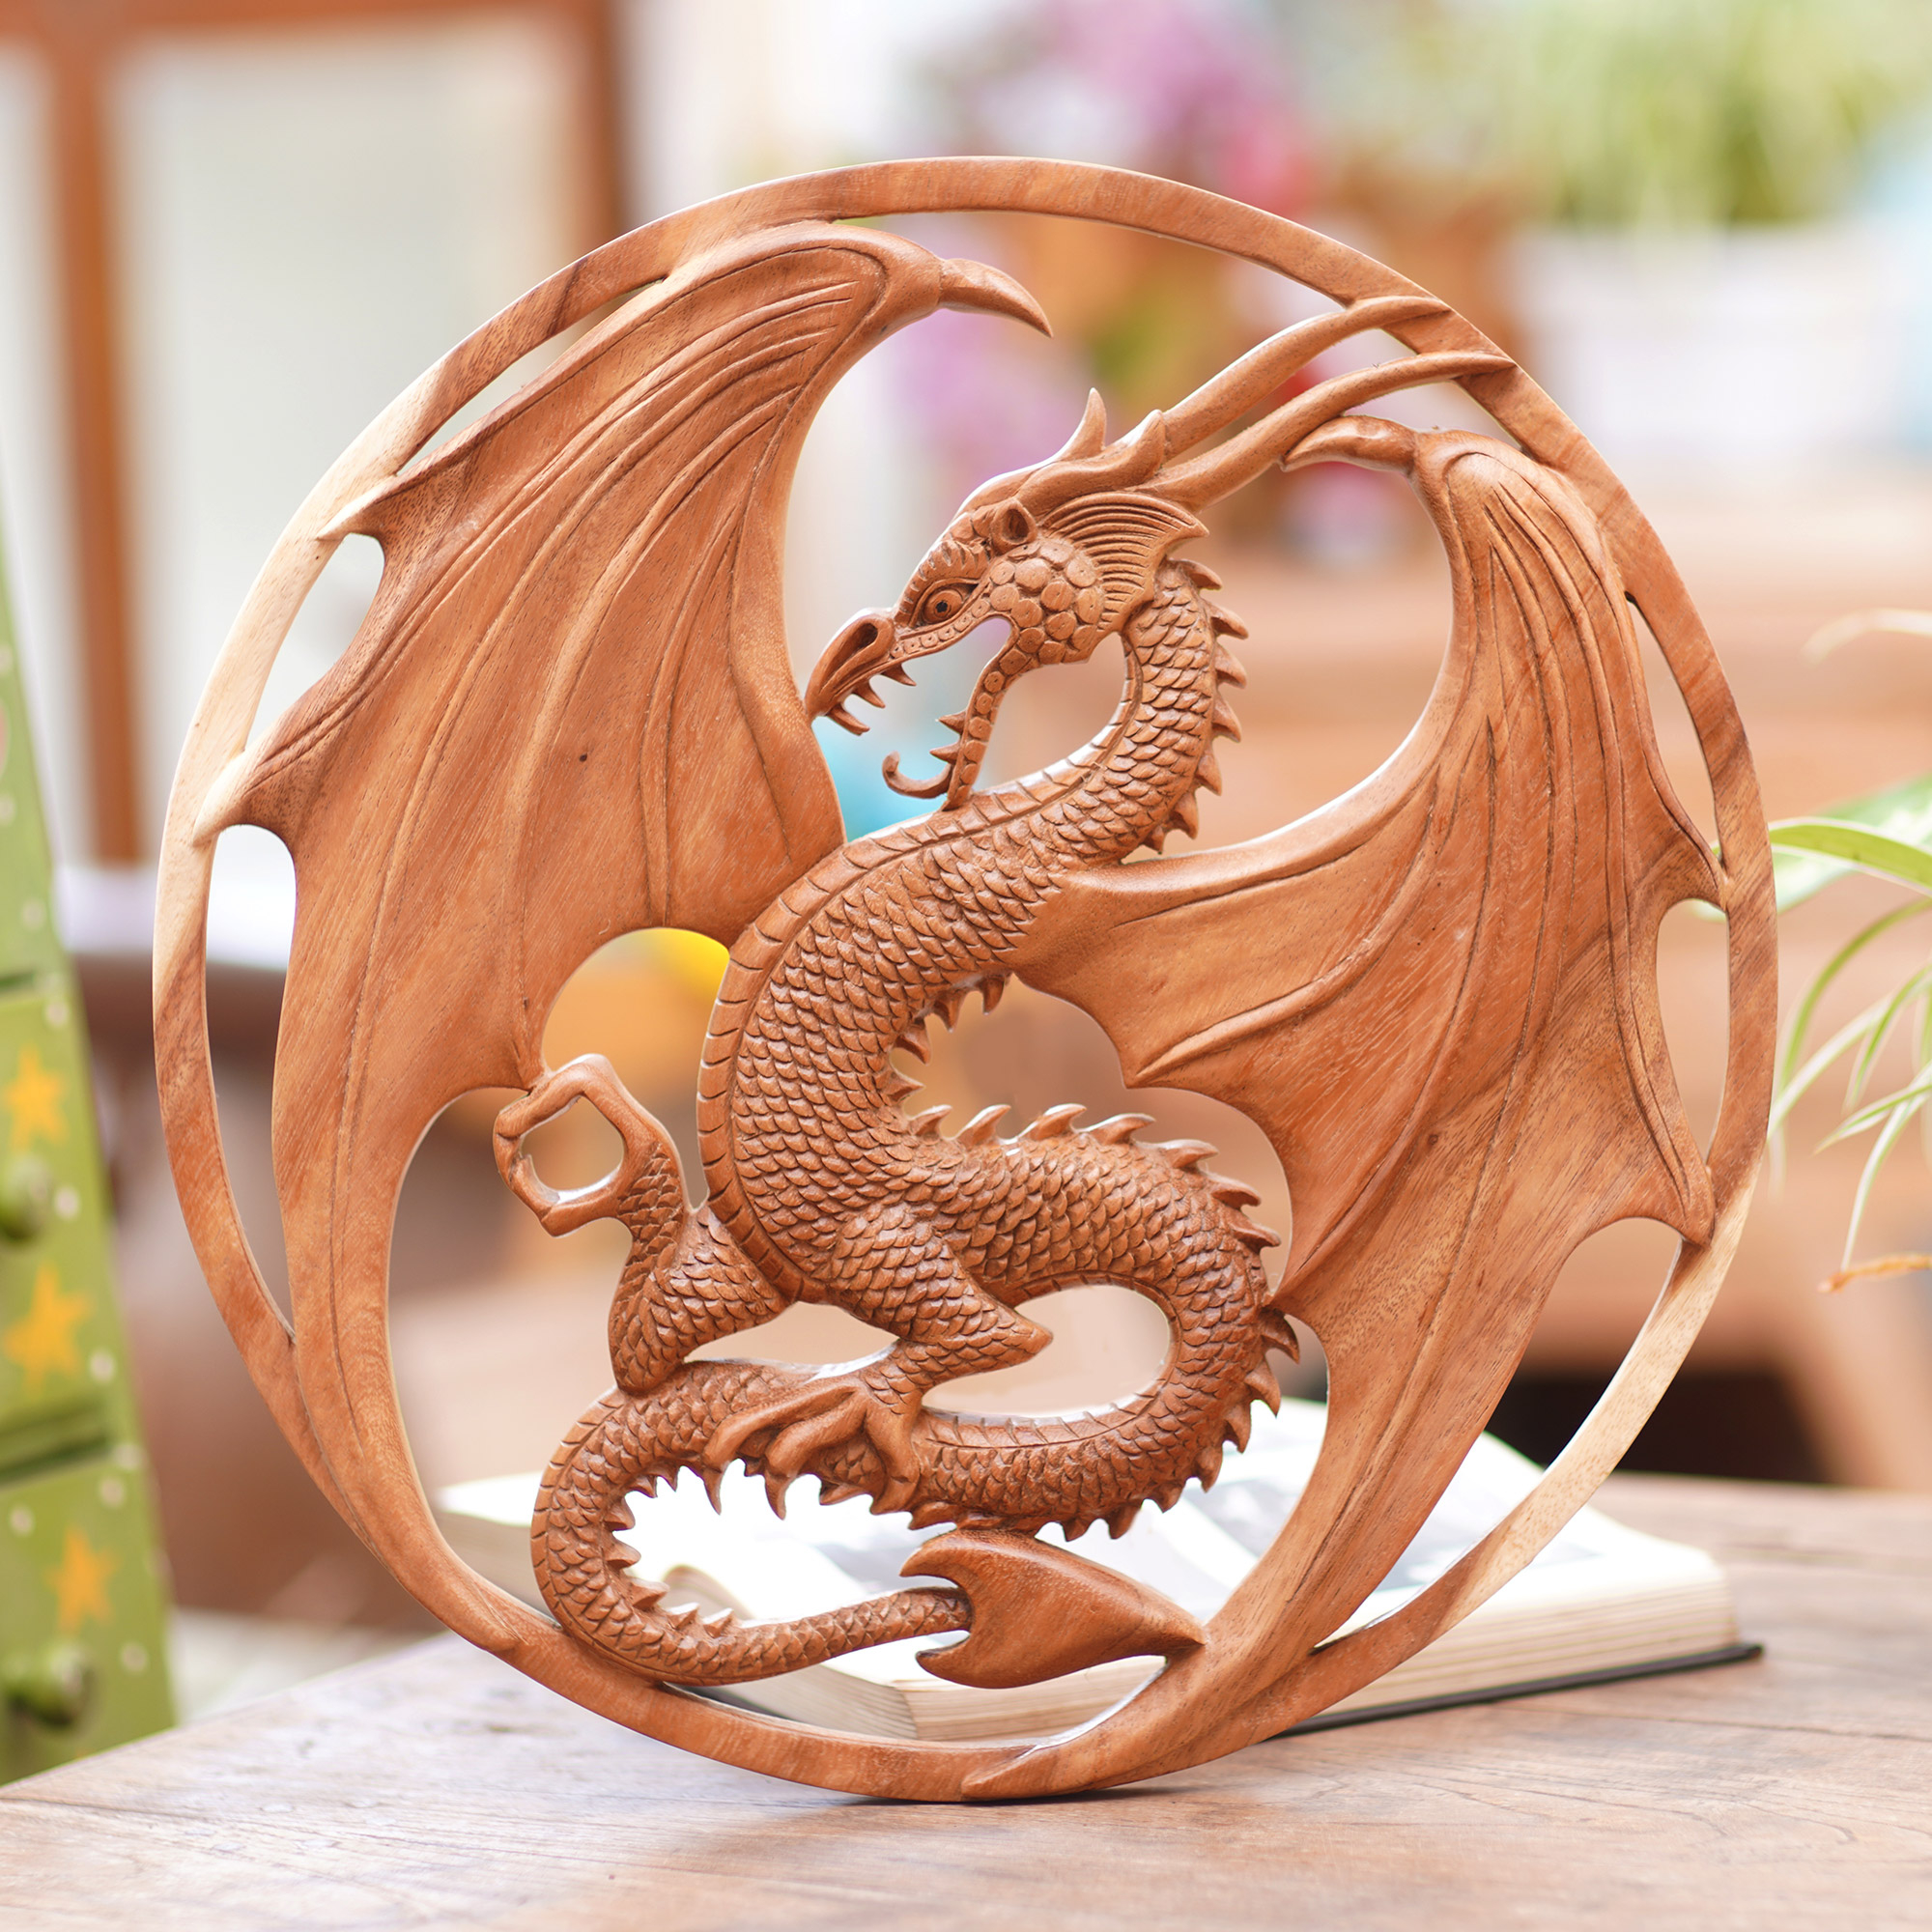 Dragon Motif Wood Wall Art Relief Panel from Indonesia, 'Proud Dragon